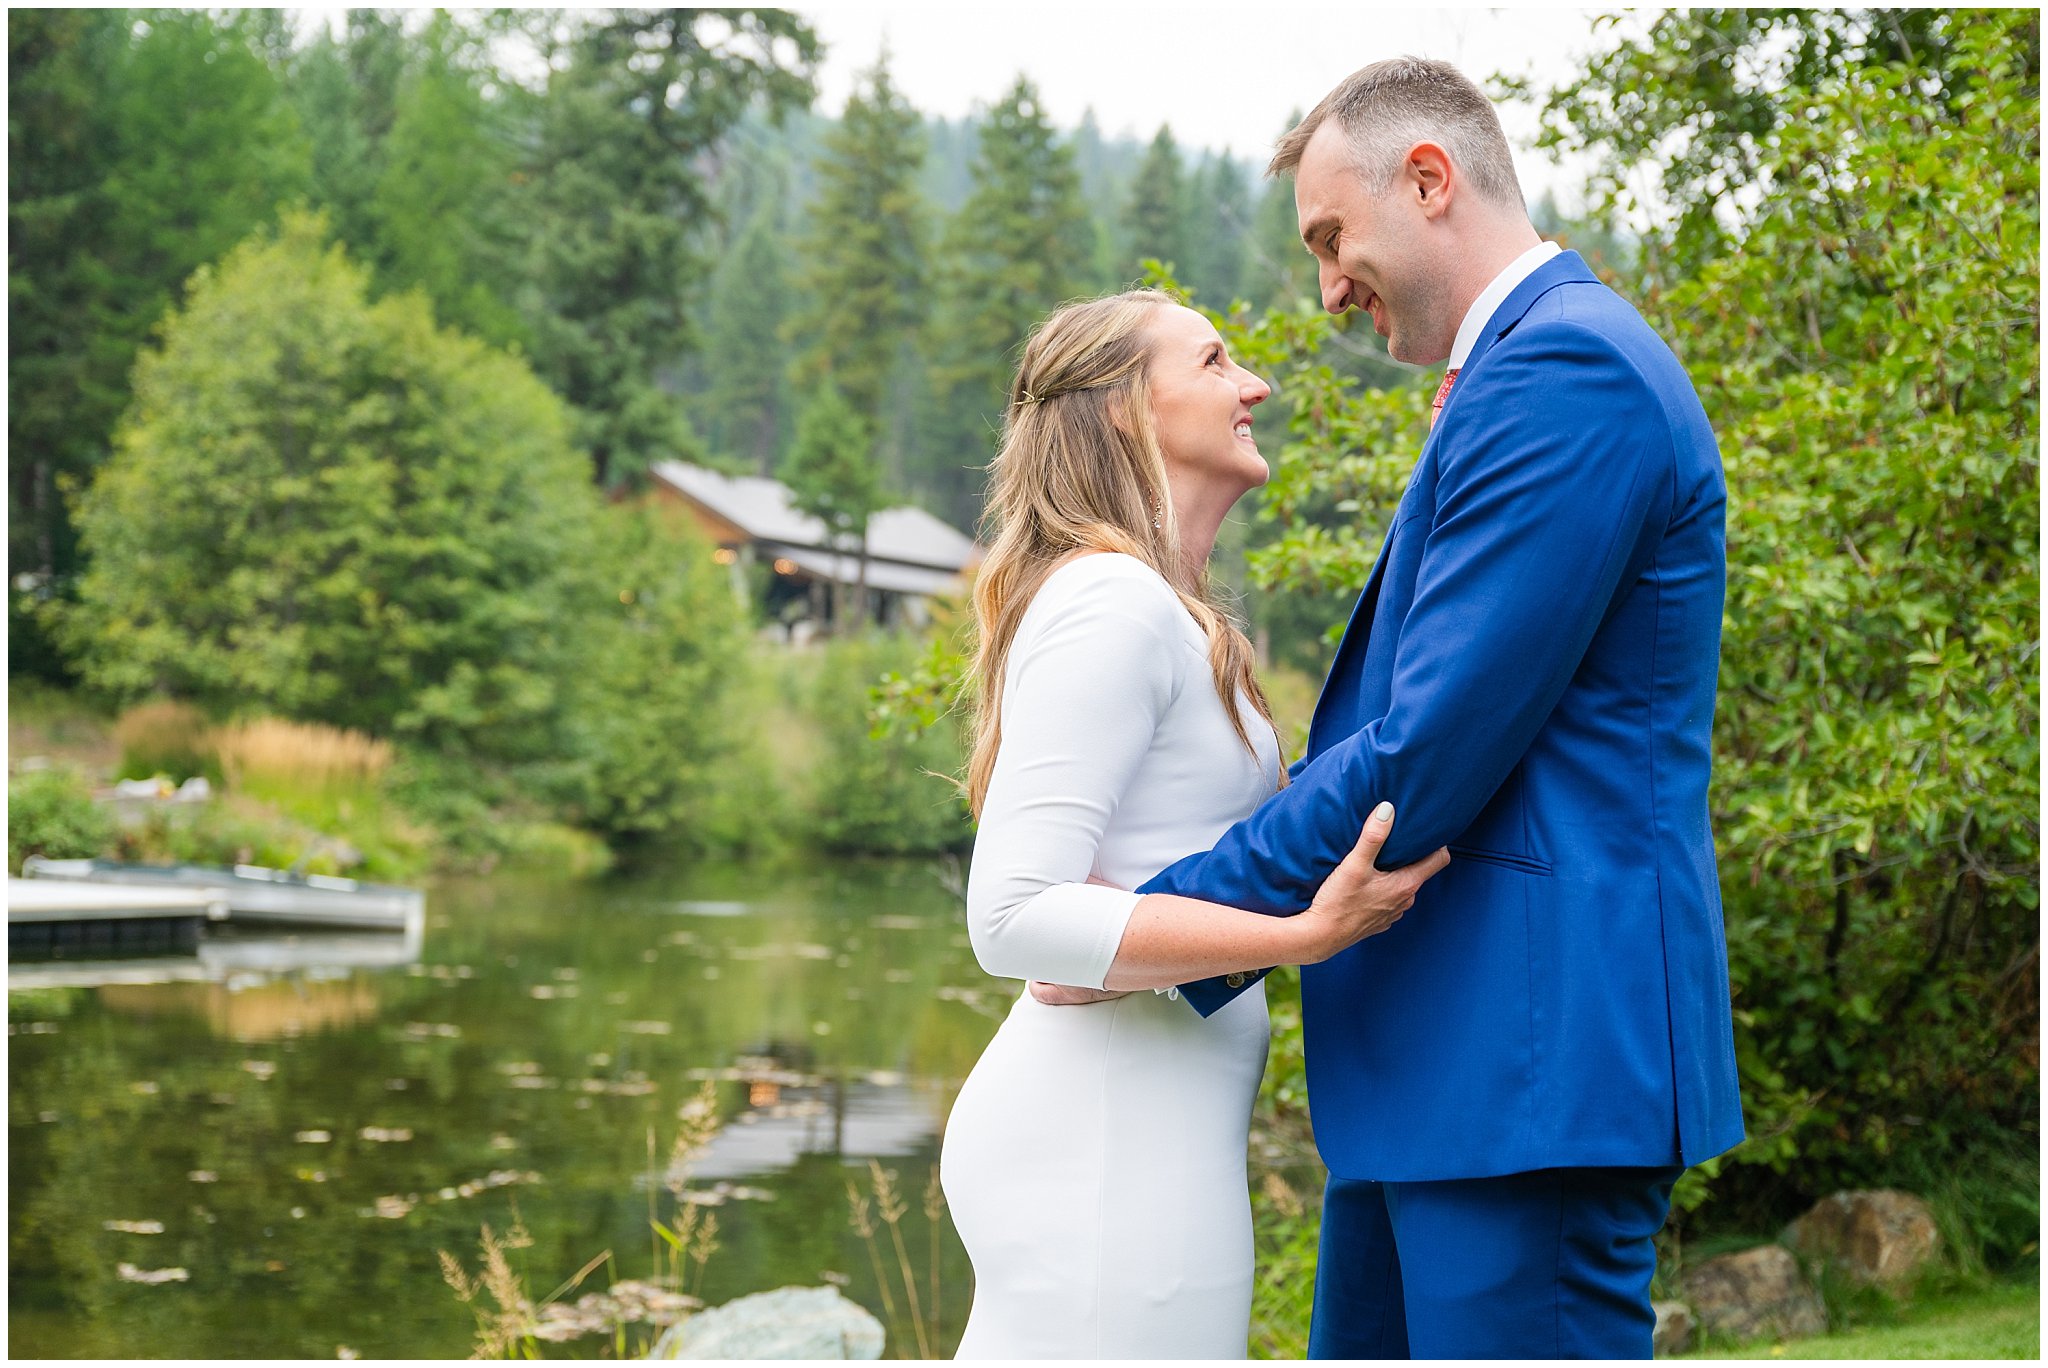 Bride and groom in exchange gifts and have first look in the forest of Montana by a pond | Mountainside Weddings Kalispell Montana Destination Wedding | Jessie and Dallin Photography